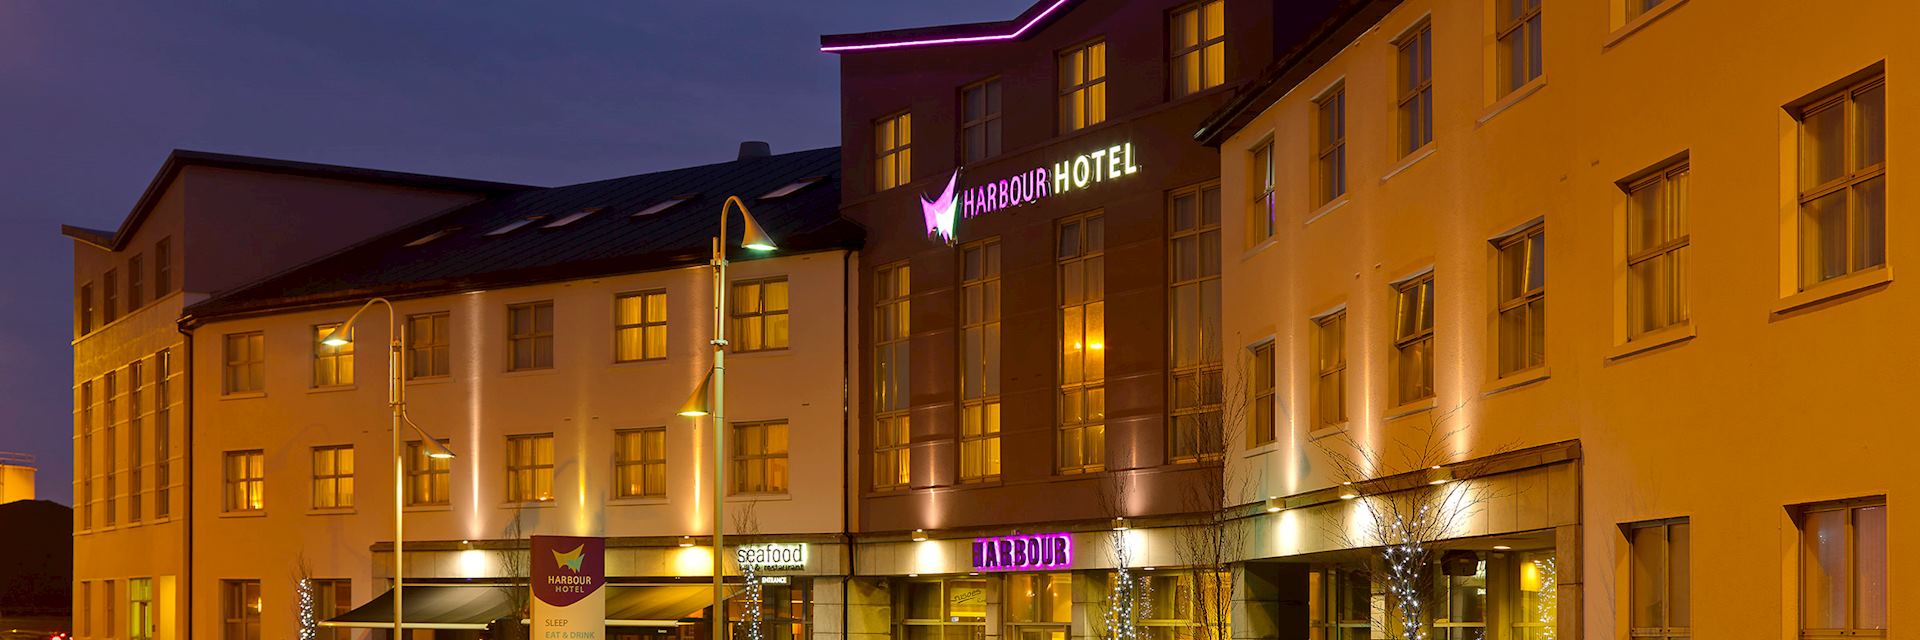 Harbour Hotel, Galway